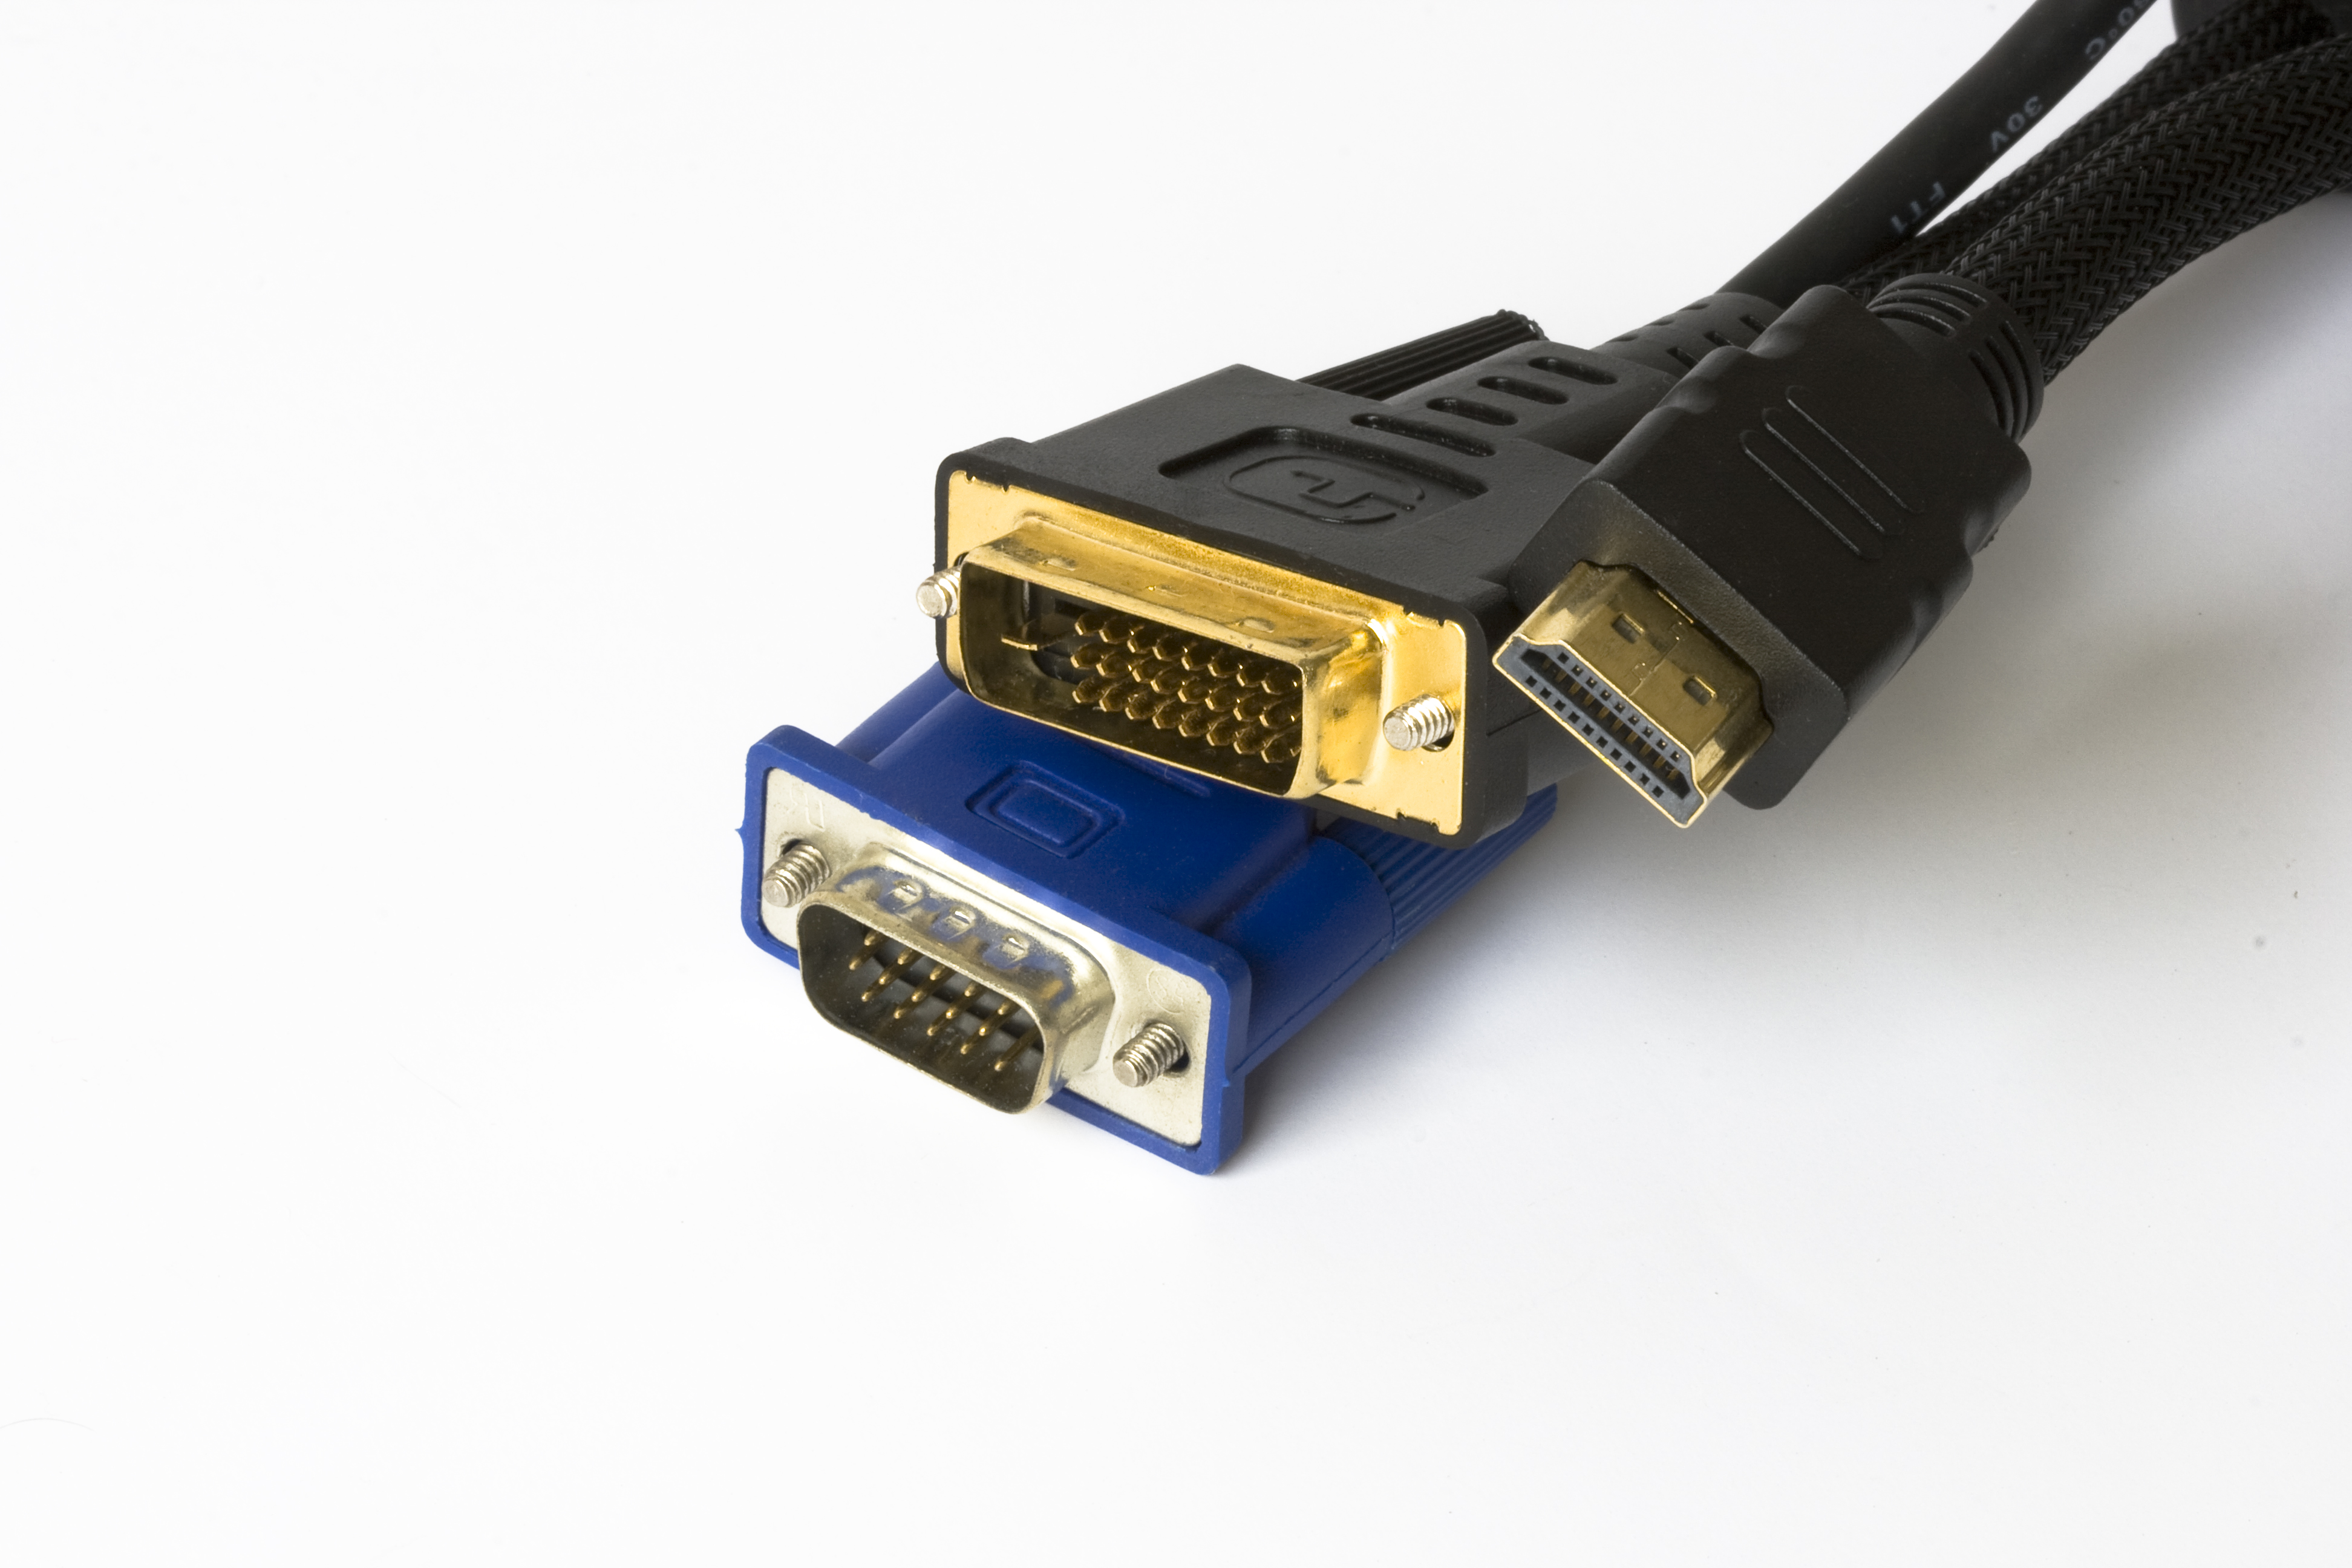 Three generations of video connectors: VGA, DVI and HDMI on a white background